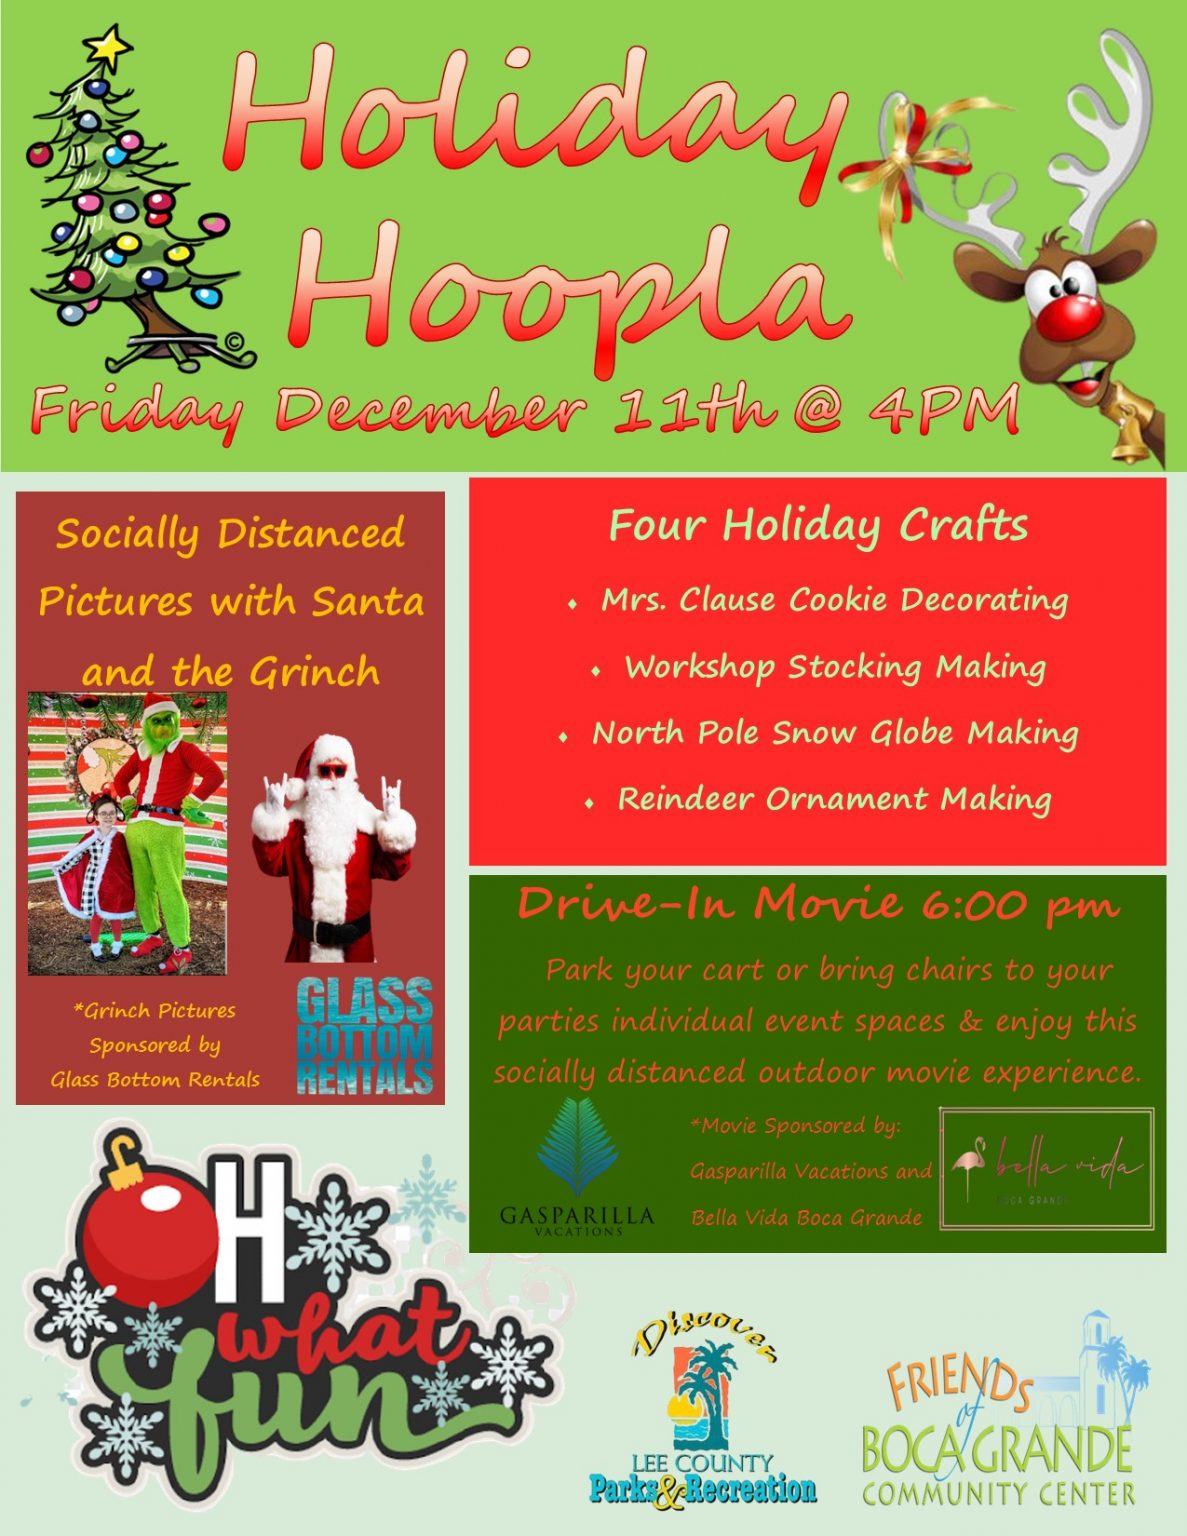 Lee County Parks & Rec: 1st Annual Holiday Hoopla! - Boca Grande